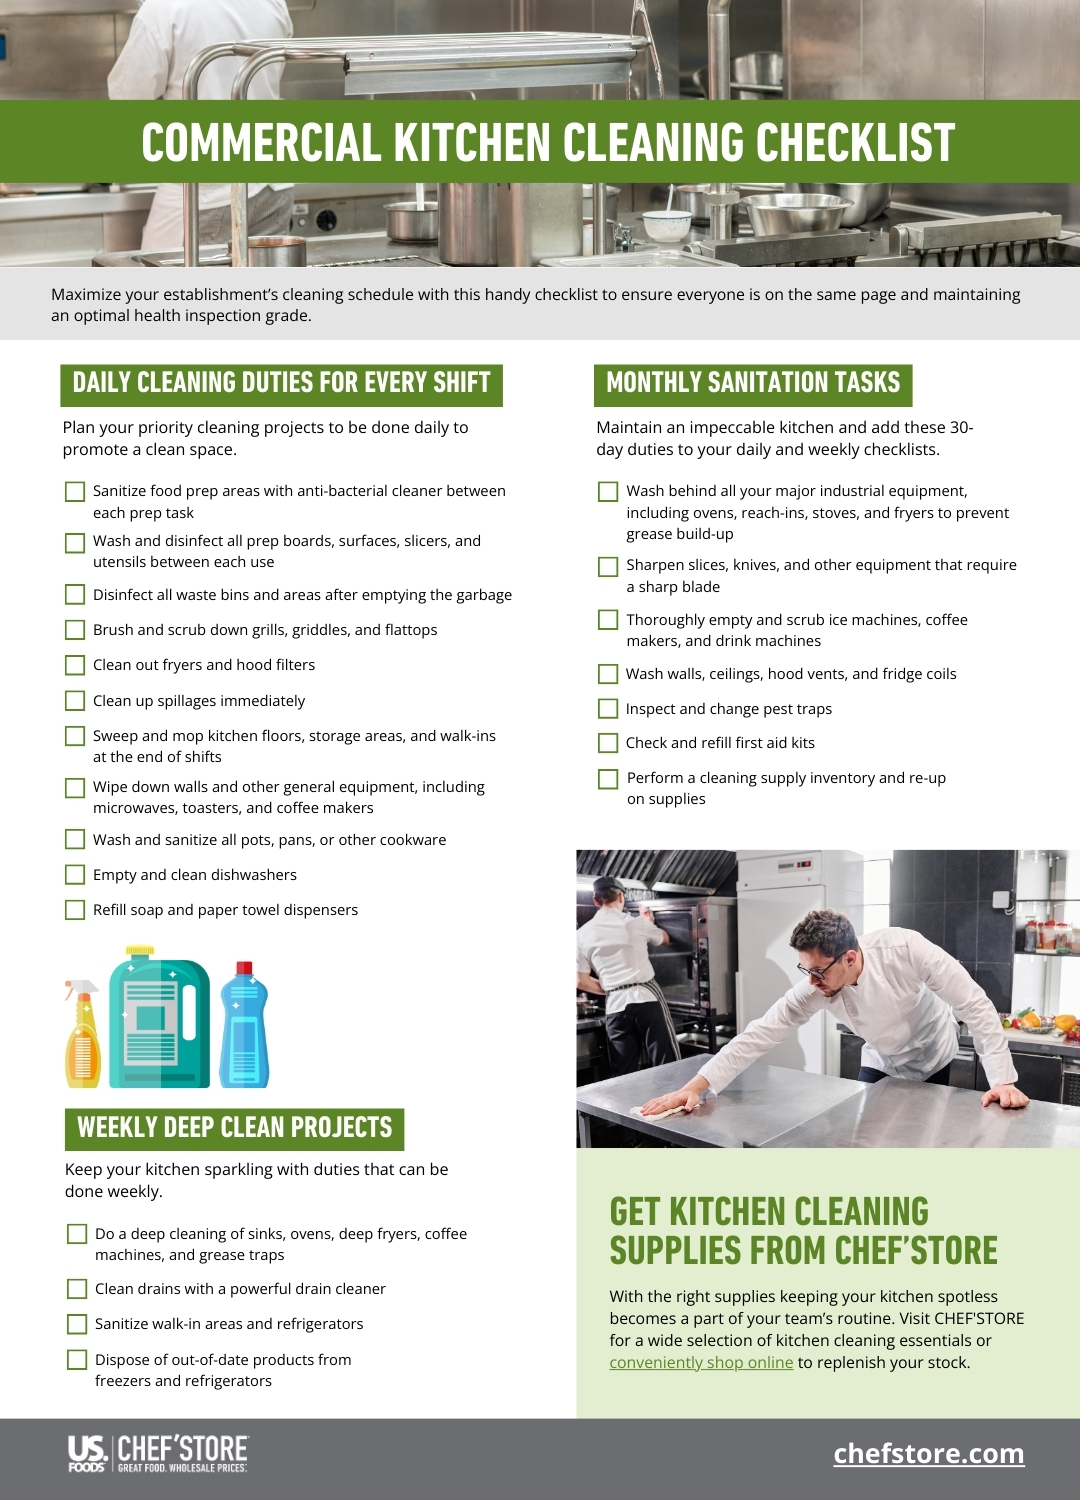 ““commercial-kitchen-cleaning-checklist””